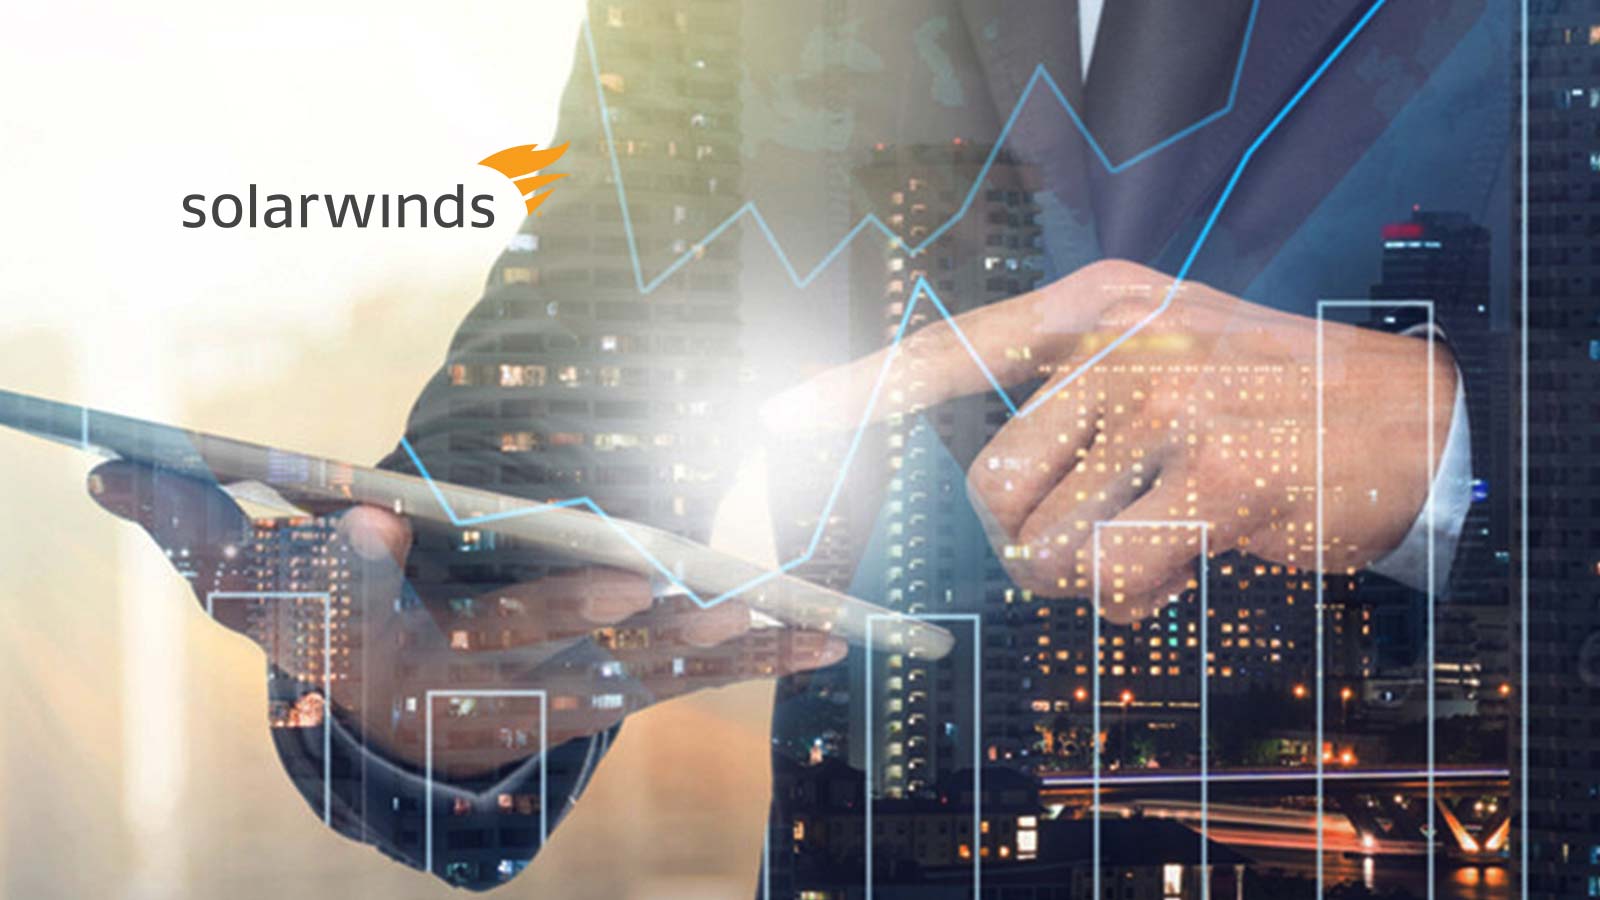 Adfontes Software welcomes global companies for SolarWinds IT Operations Management software & services